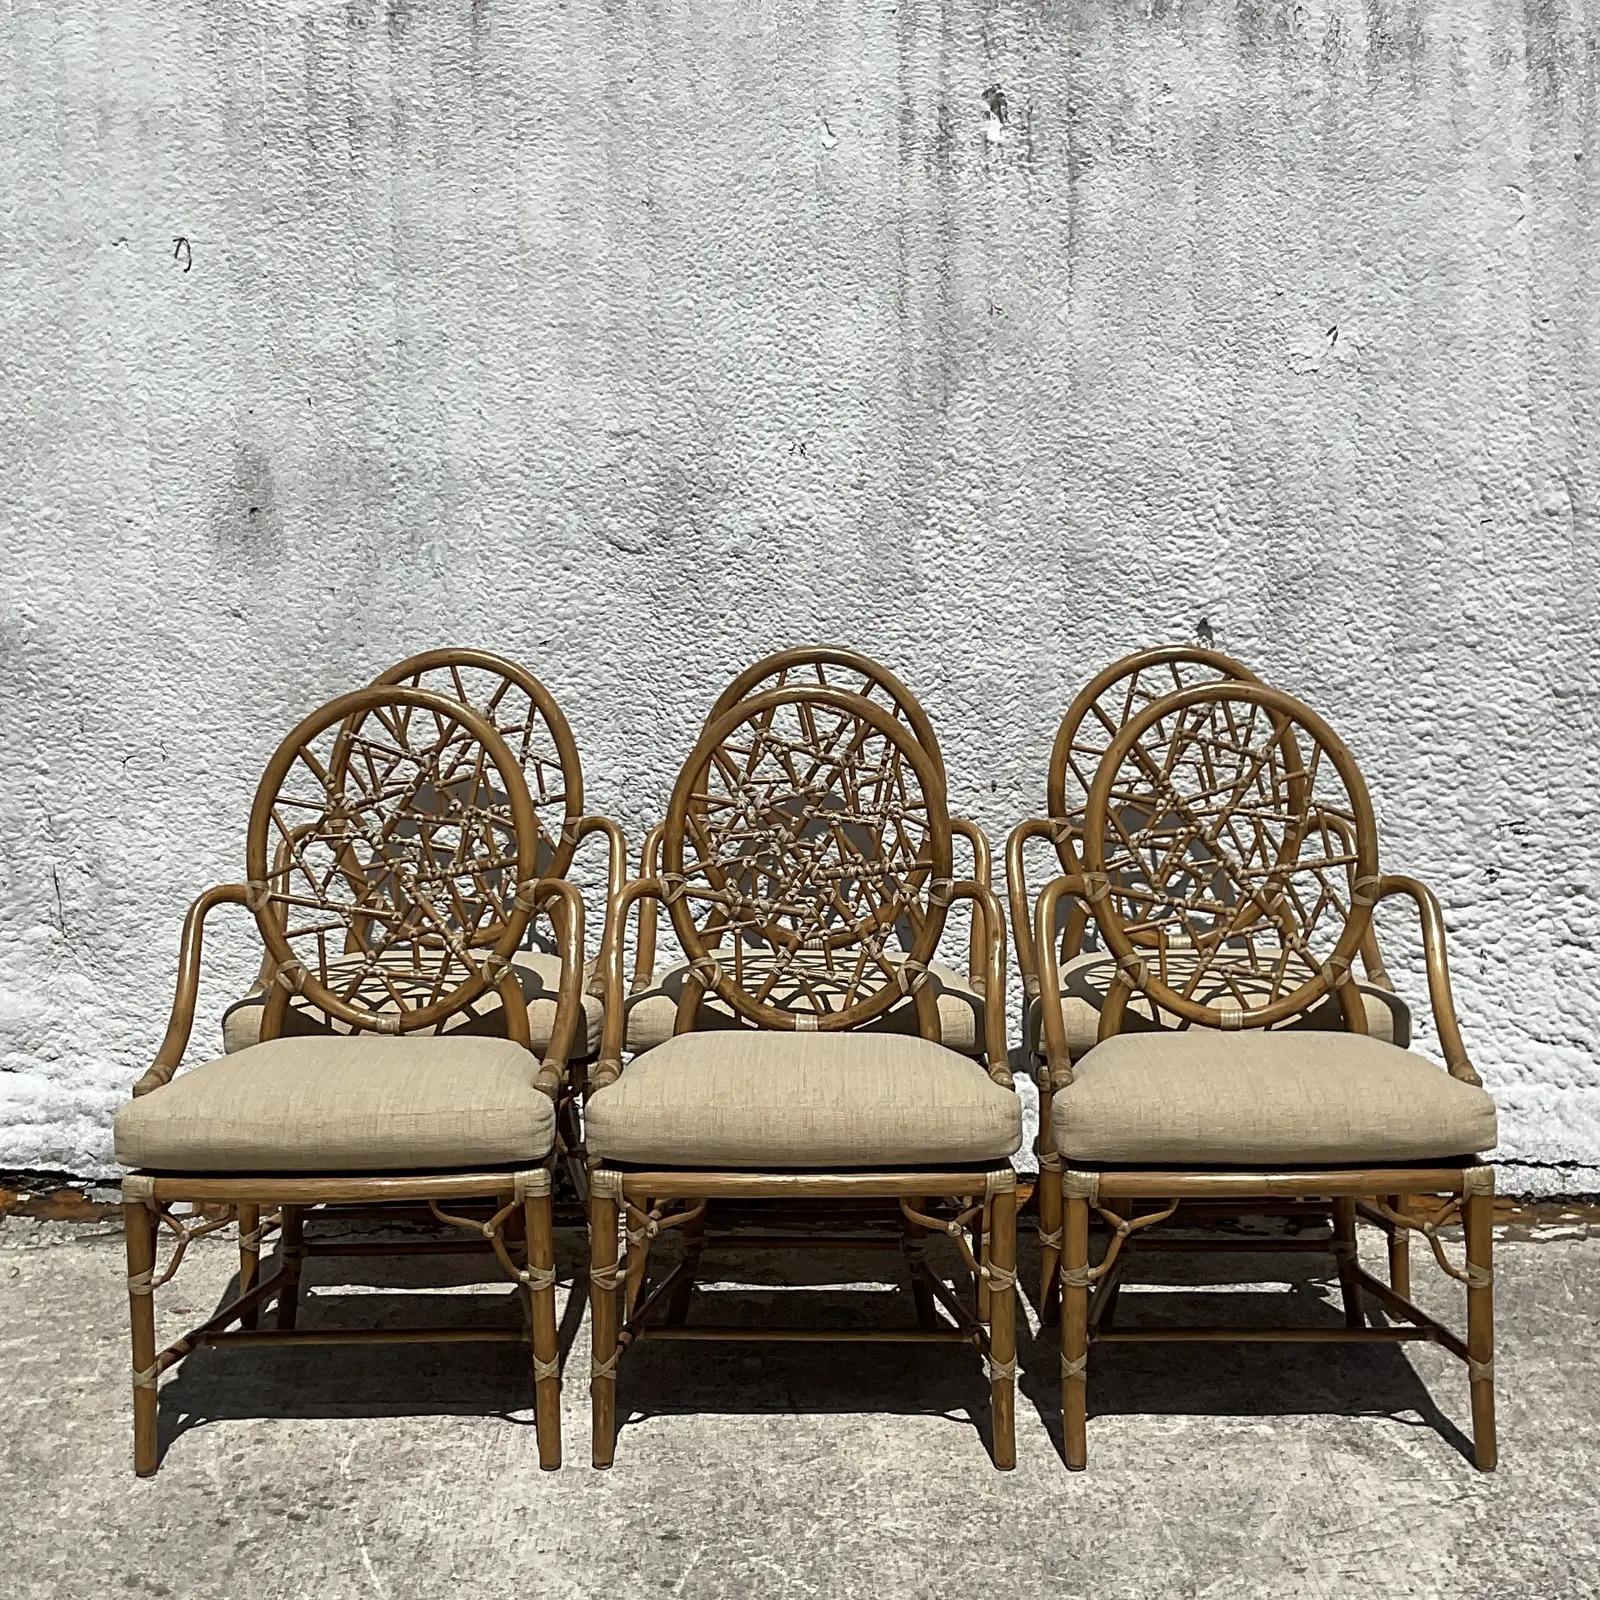 Cane Vintage Coastal McGuire “Cracked Ice” Rattan Dining Chairs - Set of 6